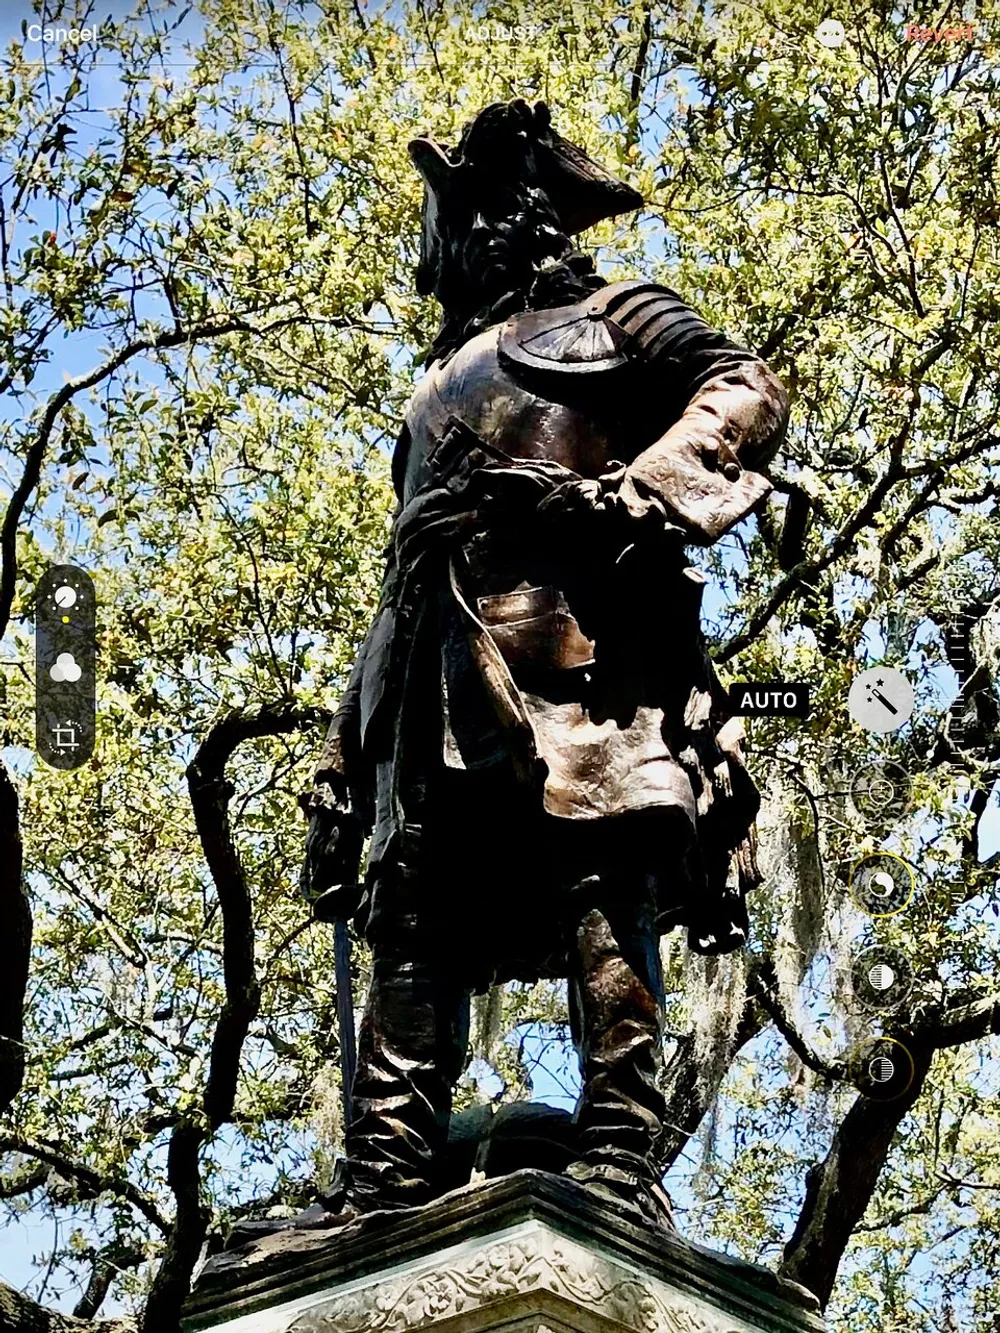 This image shows a statue of a historical figure on a pedestal with a partial view of the camera interface overlay indicating that the photo may have been taken accidentally while trying to adjust the camera settings